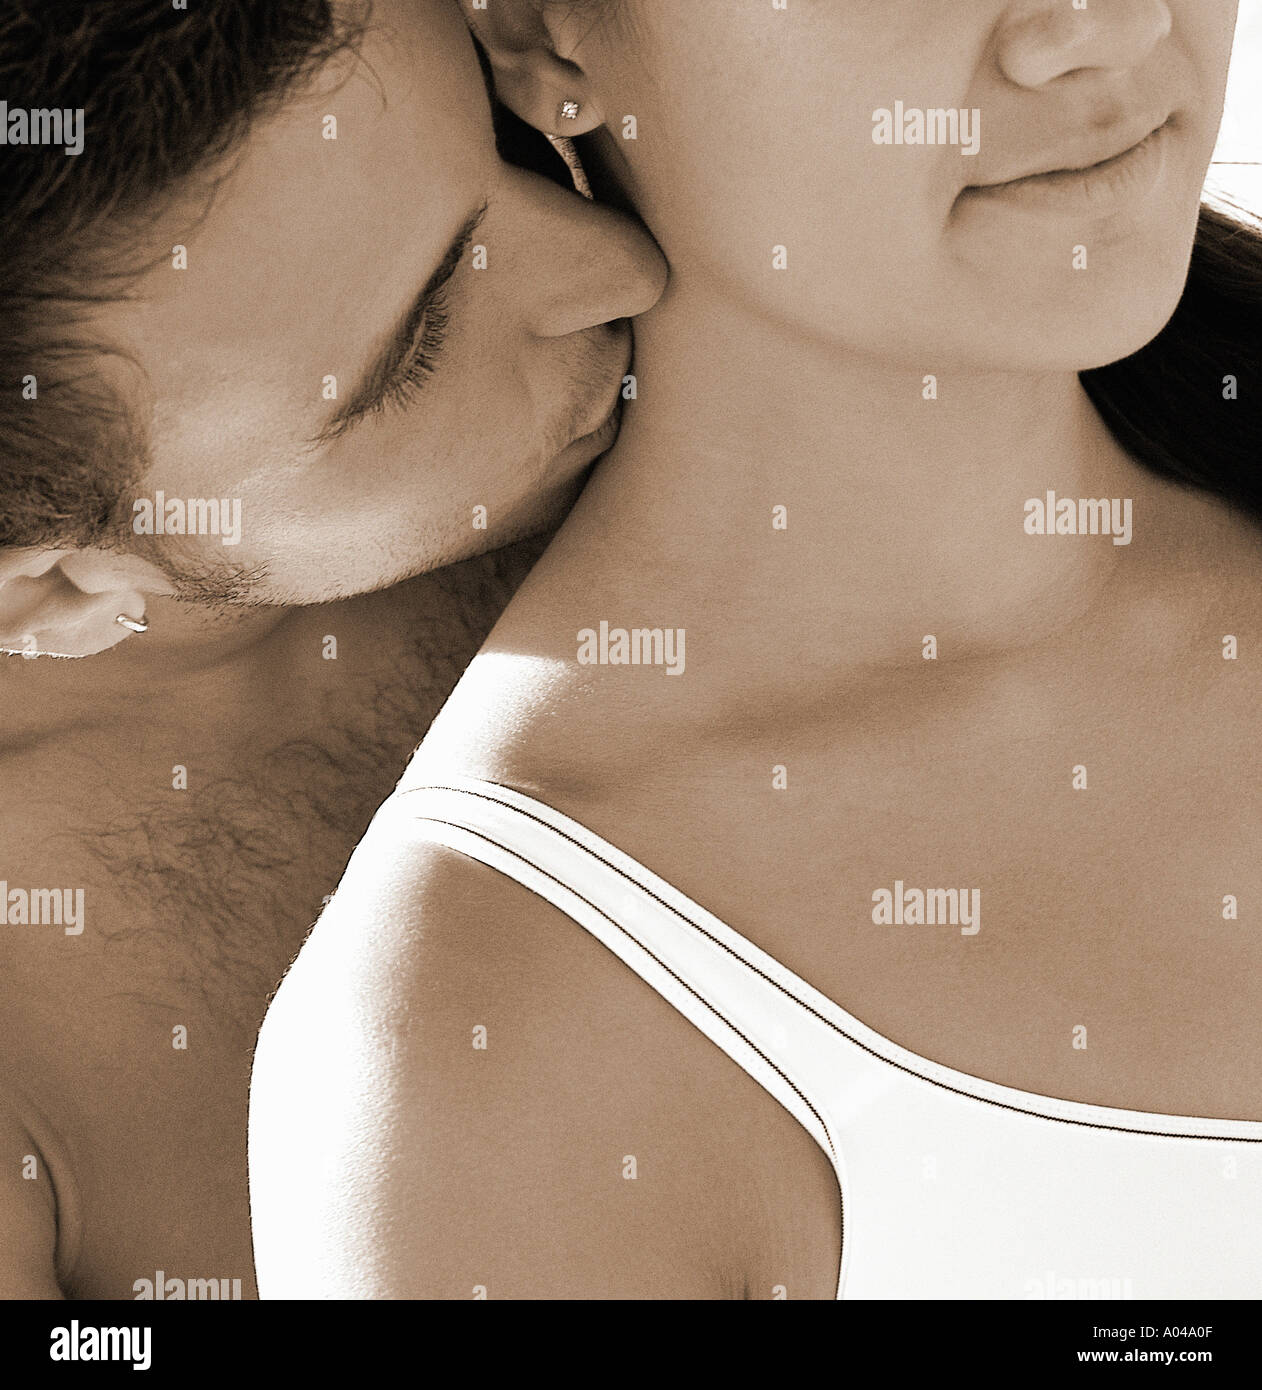 Young man kissing the neck of a young woman Stock Photo